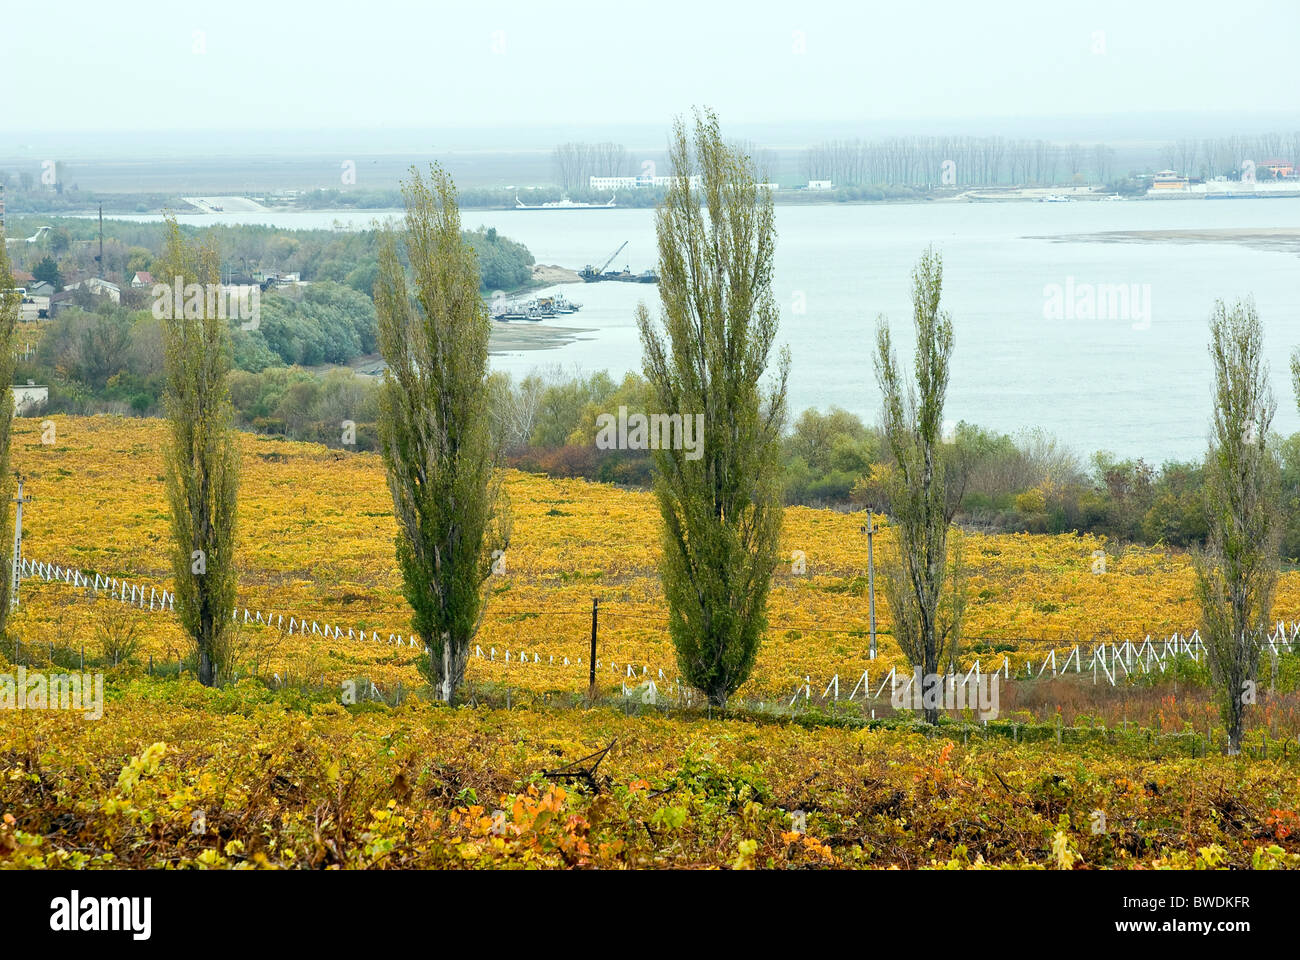 Vineyards on the banks of the Danube in Romania Stock Photo